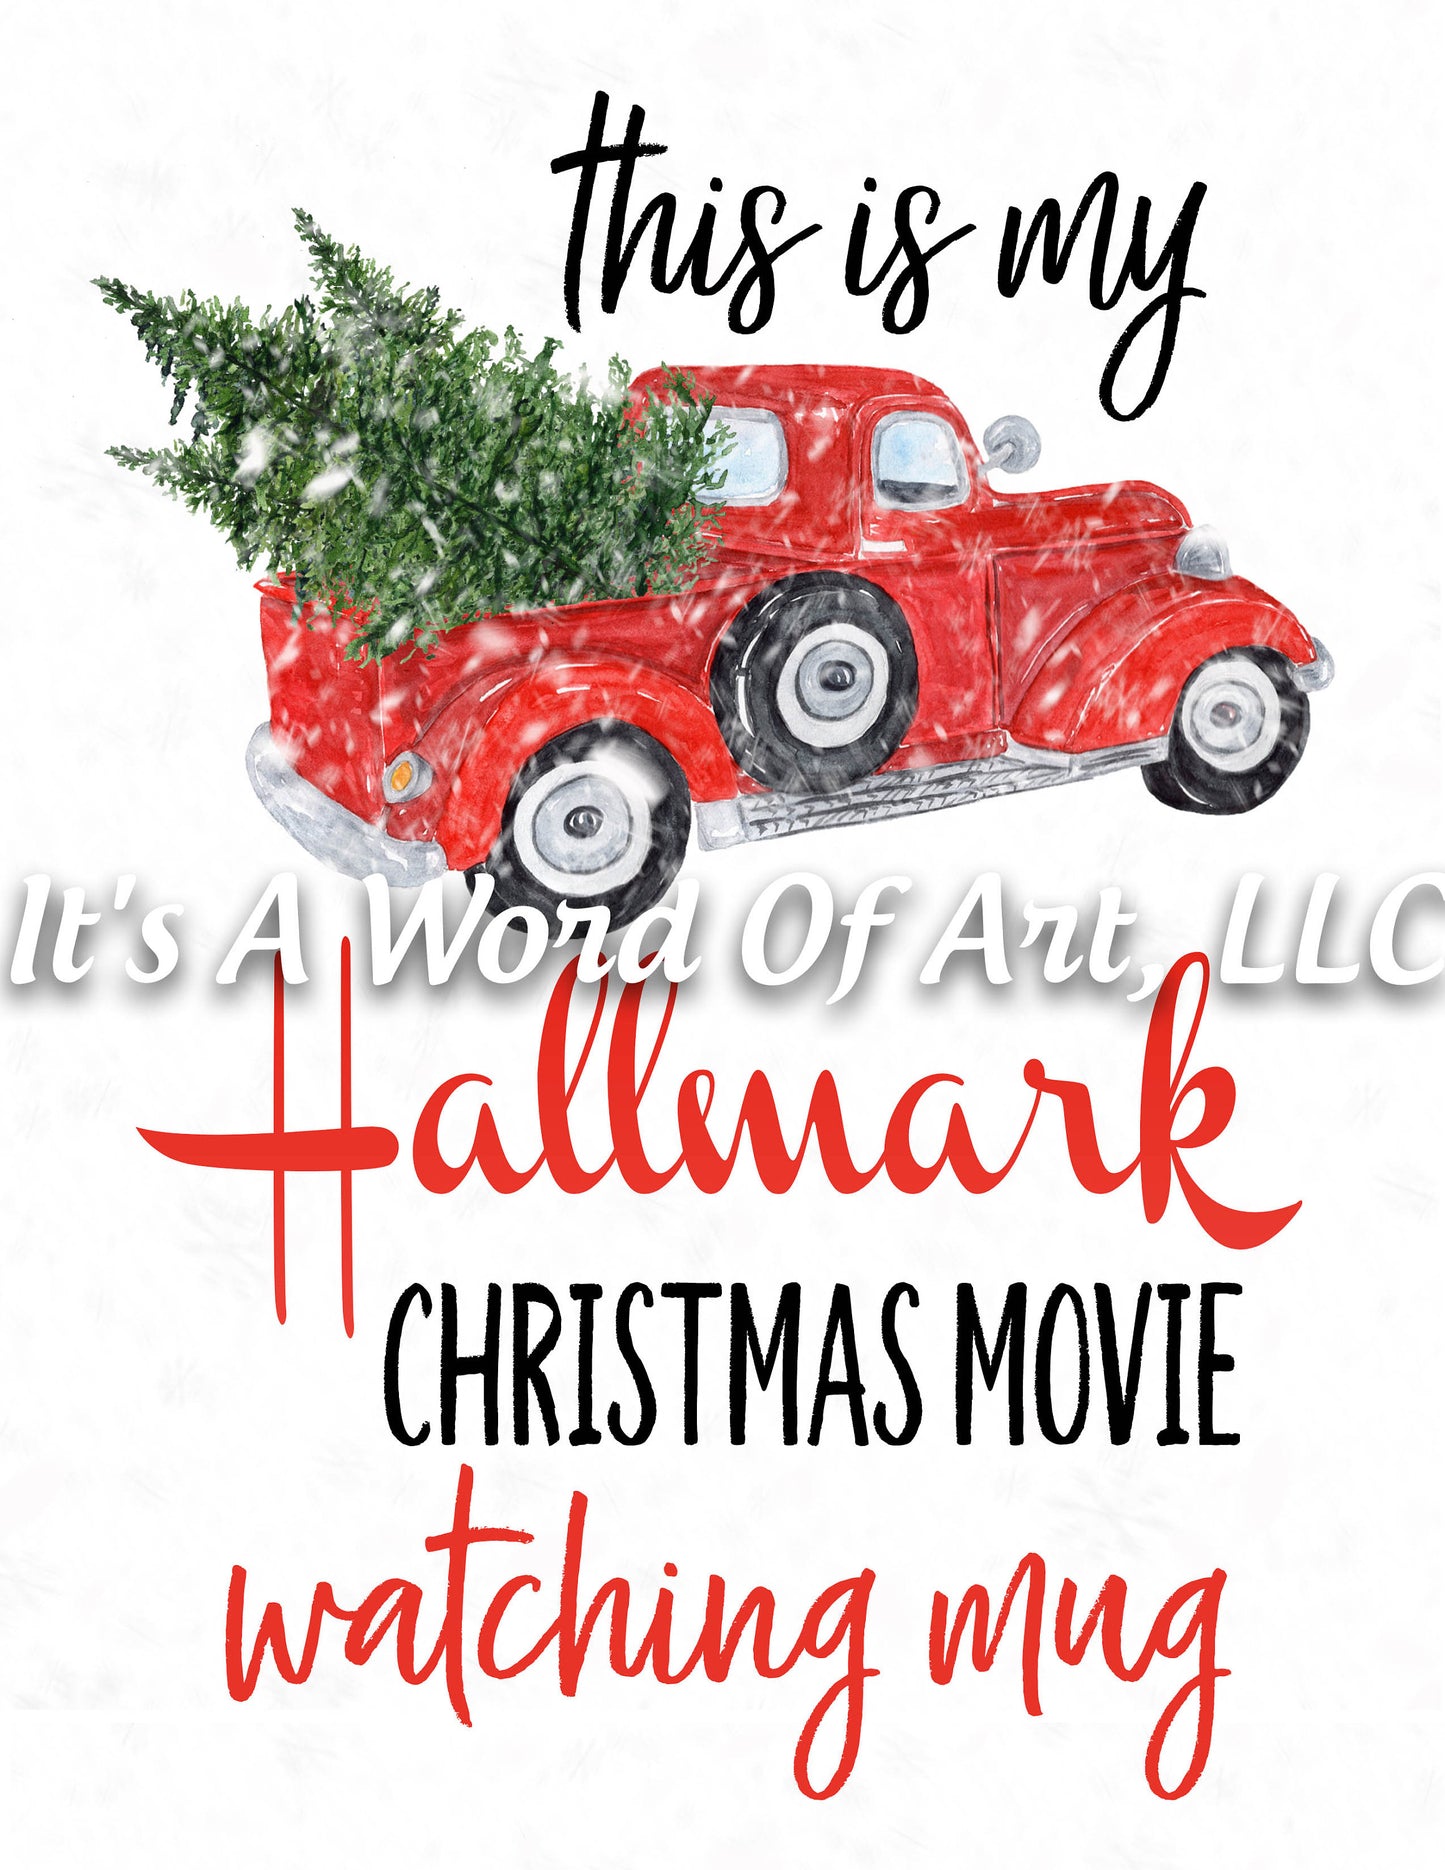 Christmas 212 - This is my Christmas Movie Watching Blanket Christmas Truck- Sublimation Transfer Set/Ready To Press Sublimation Transfer